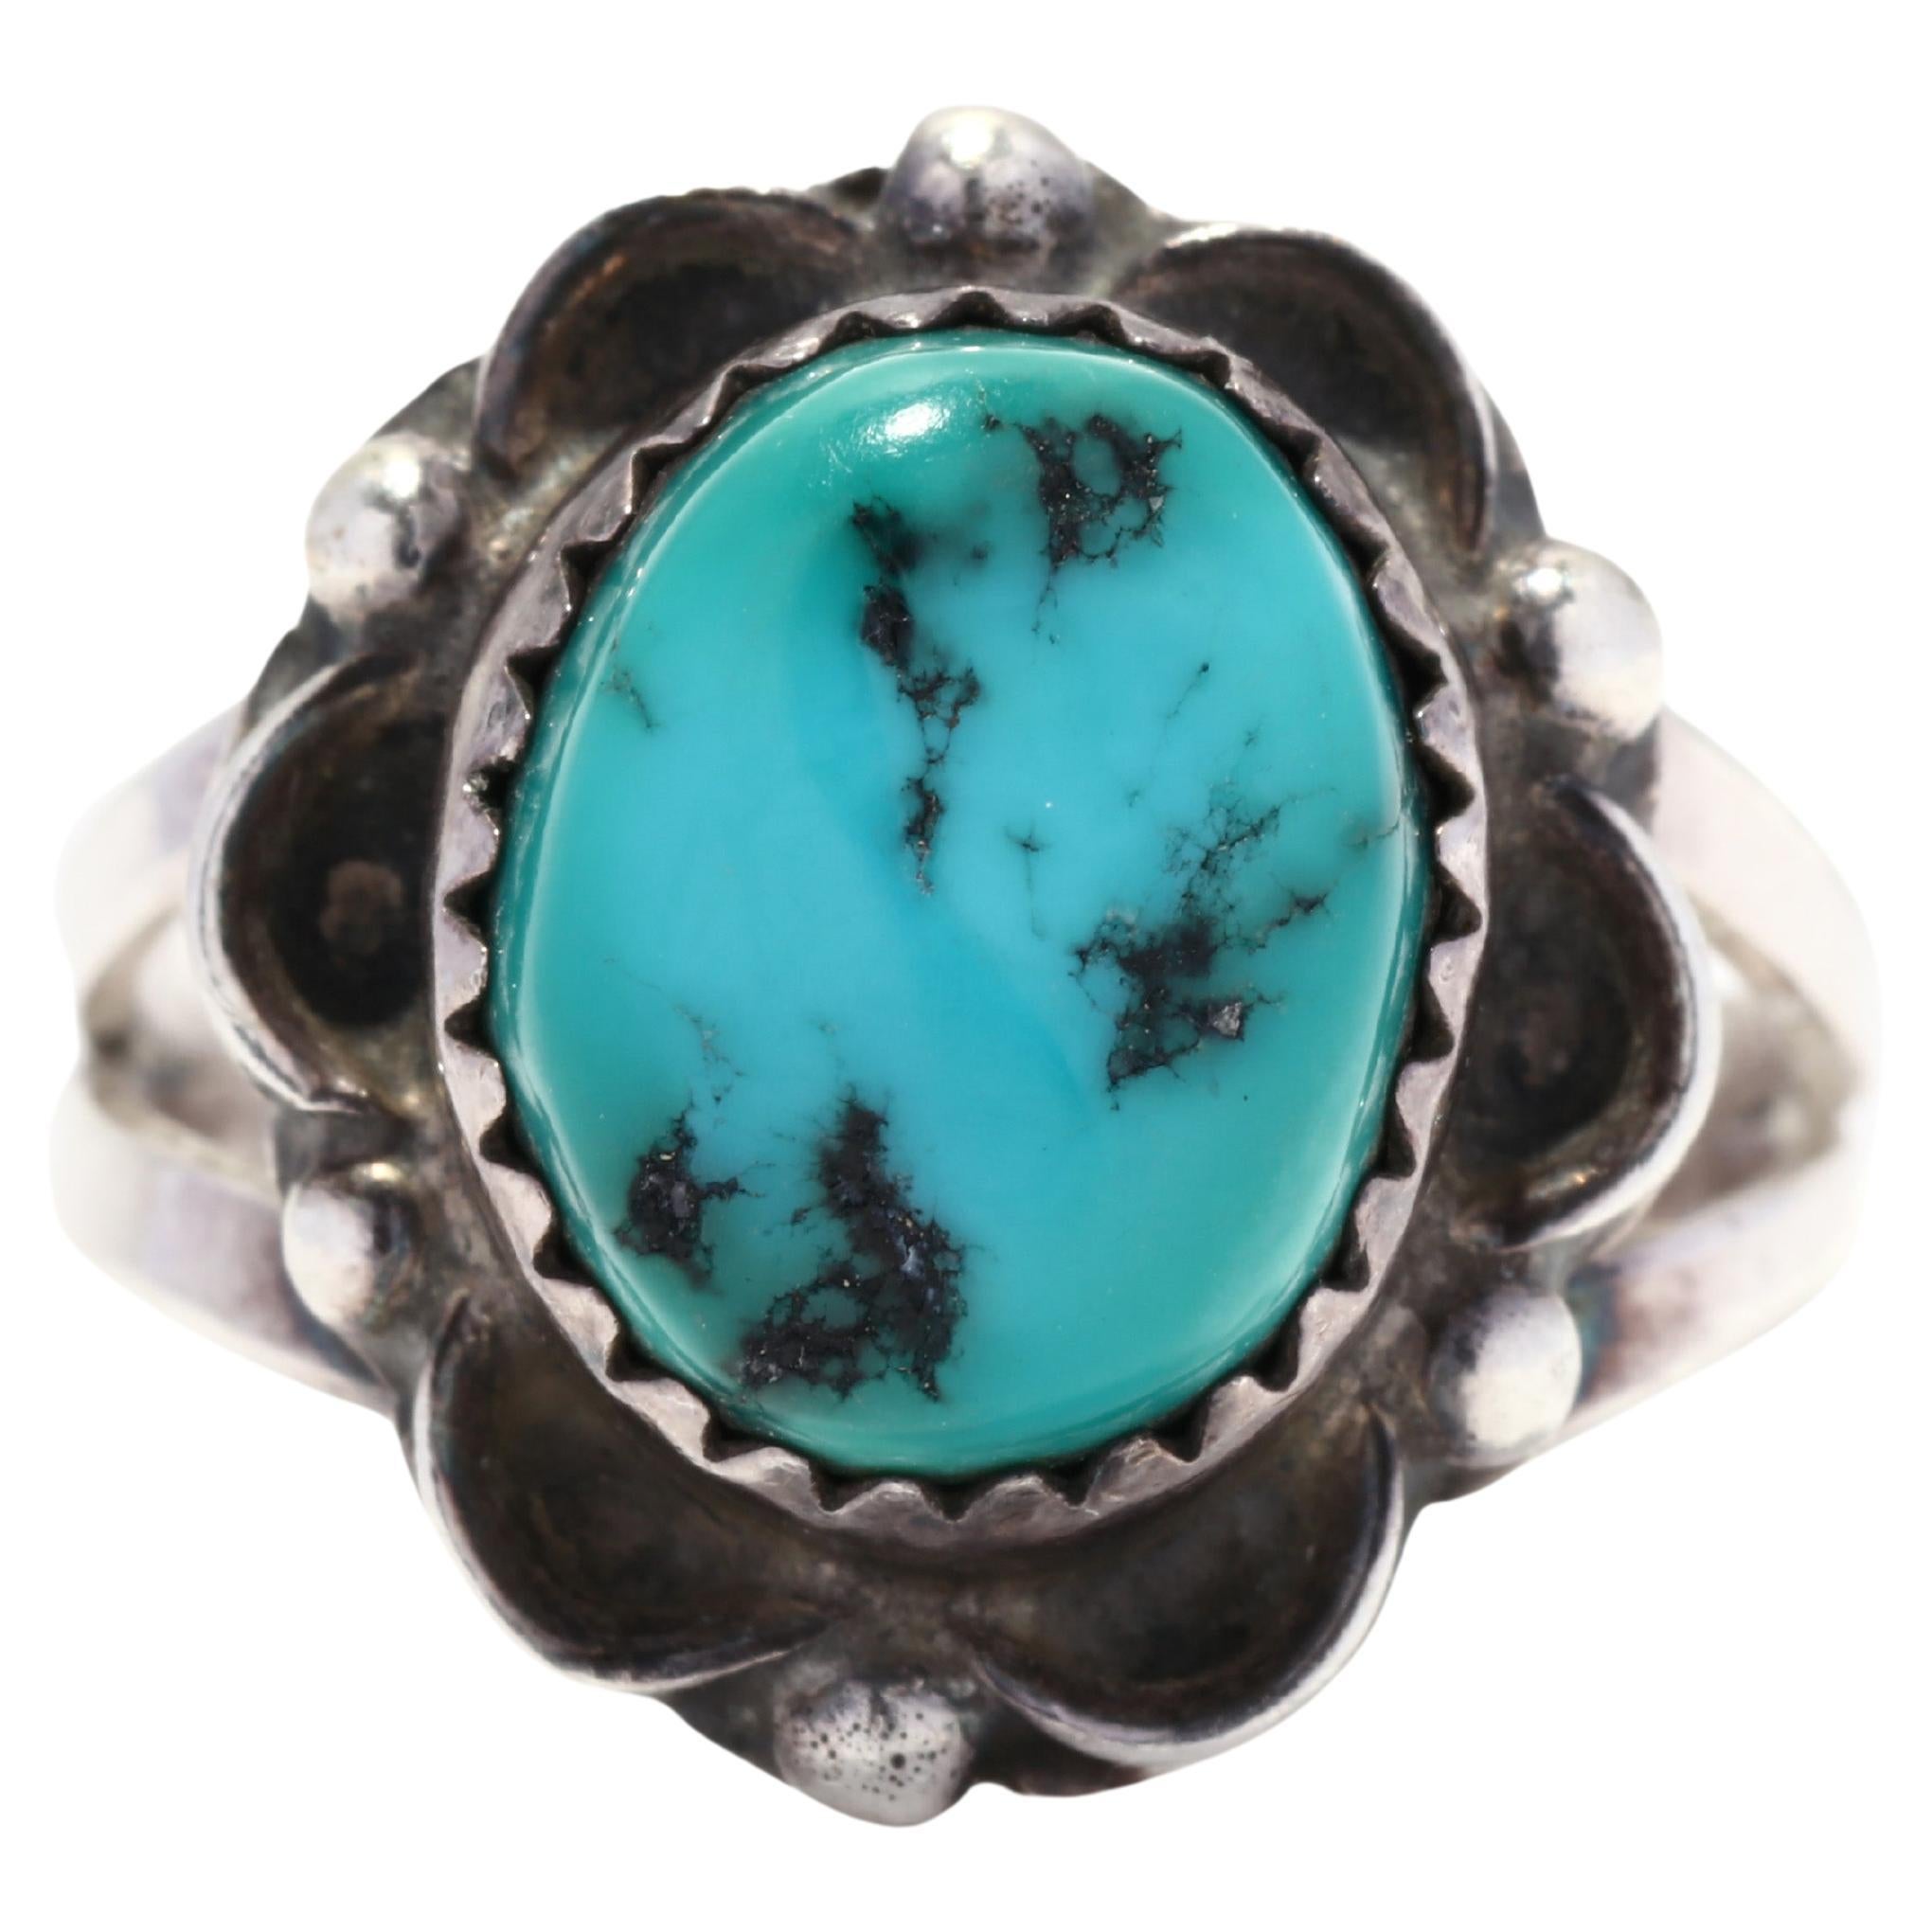 Southwestern Turquoise Ring, Sterling Silver, Ring Size 6, Turquoise Flower Ring